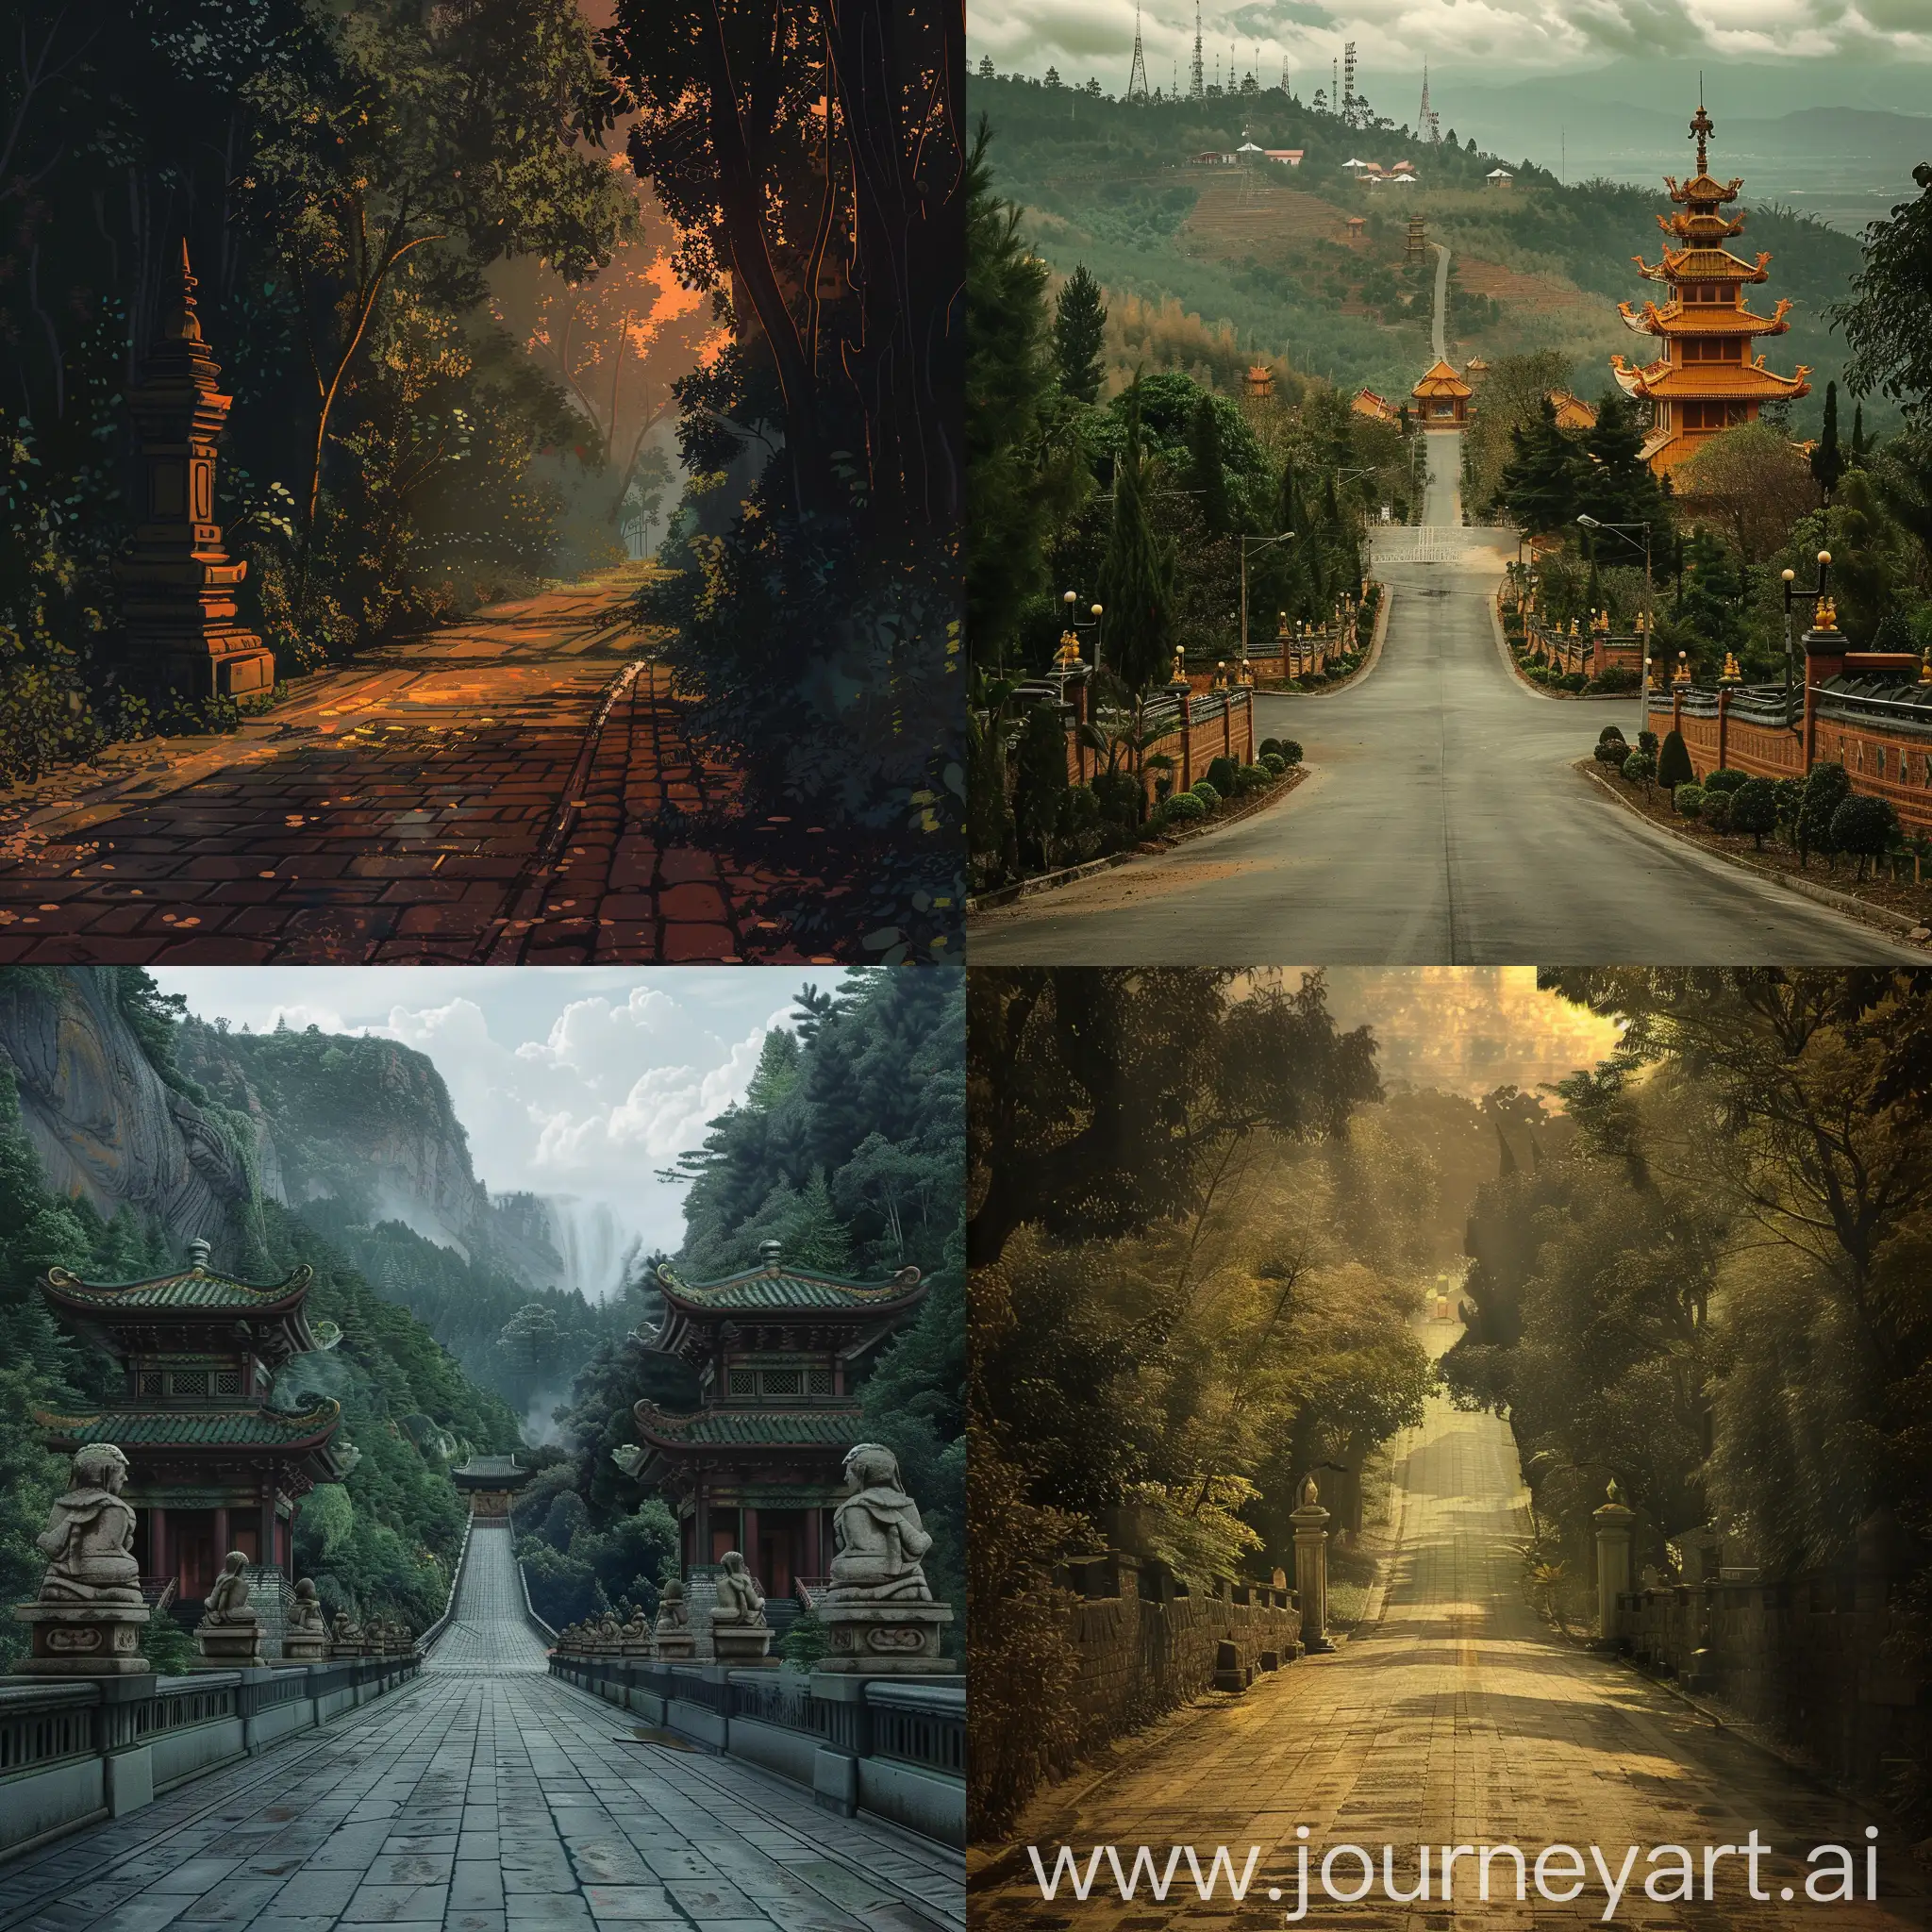 the road to the Buddhist temple